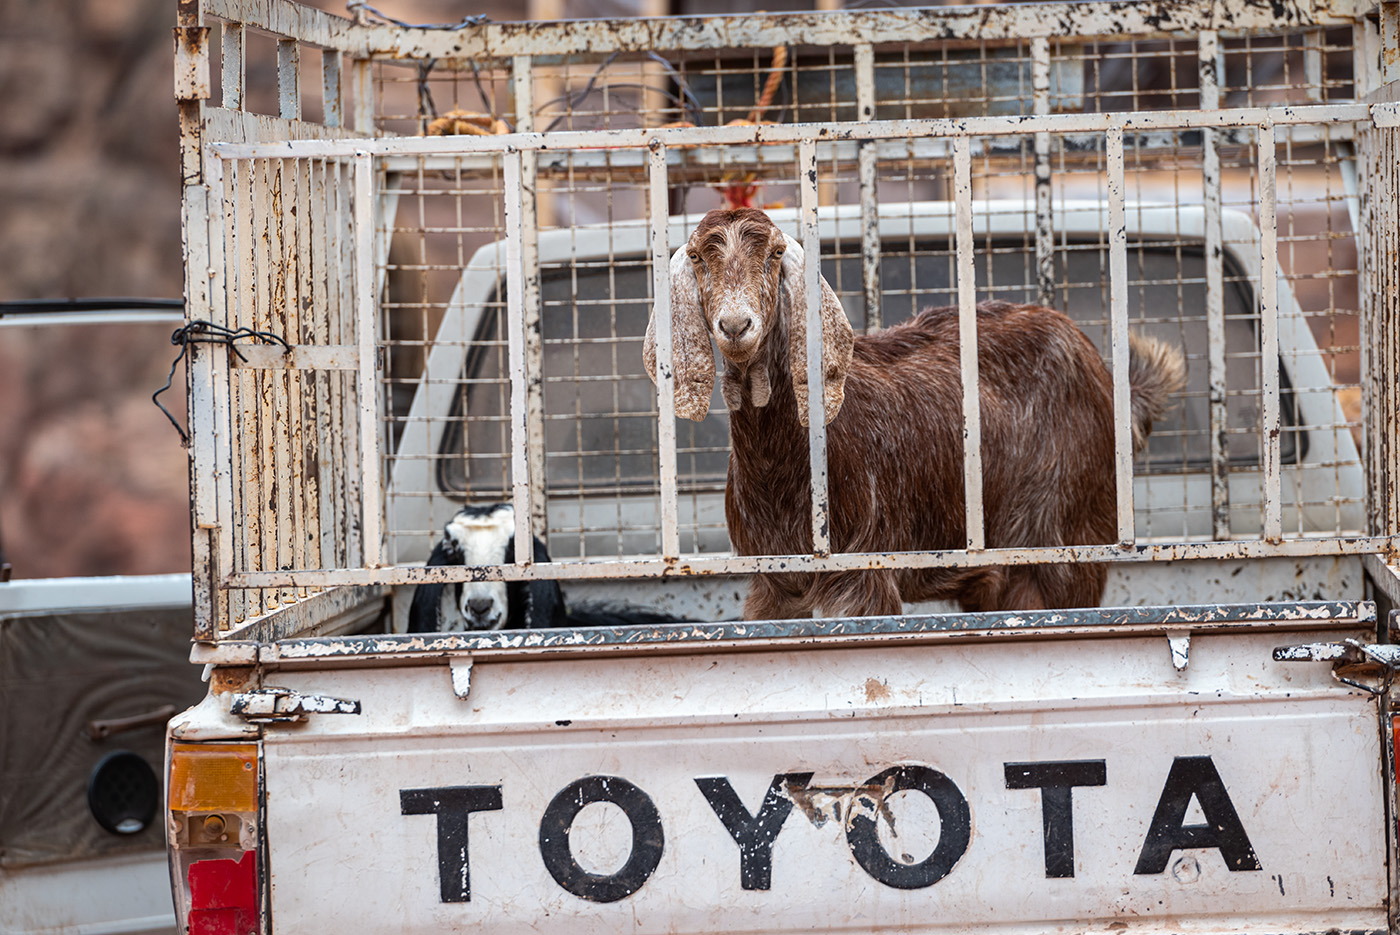 A goat in the back of a Toyota pickup truck